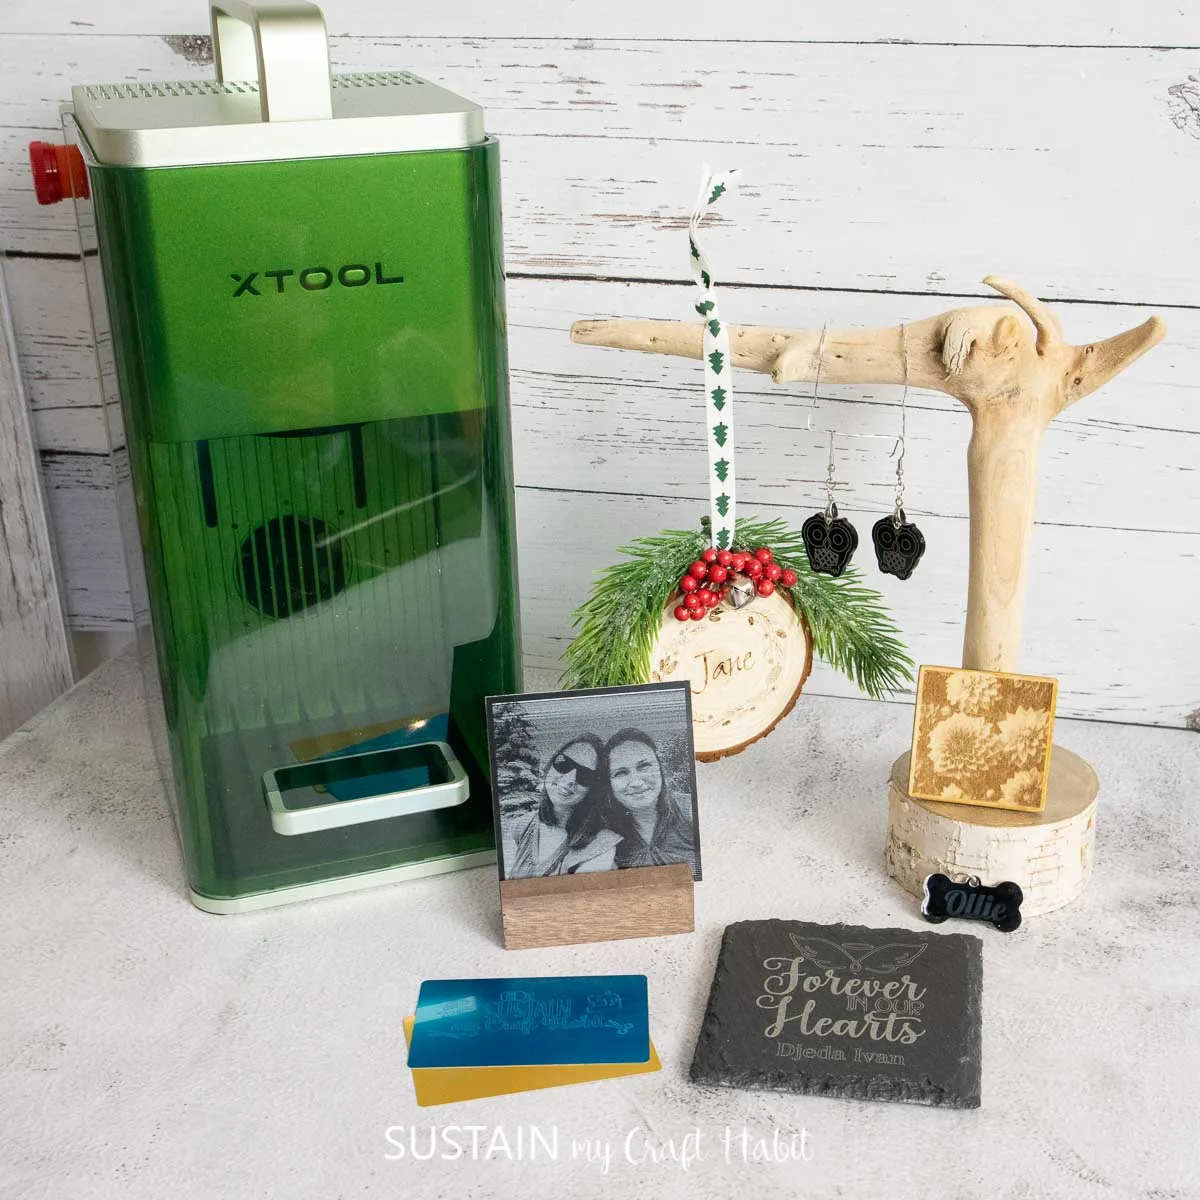 xTool F1 Review: Fastest Portable Laser Engraver – Sustain My Craft Habit